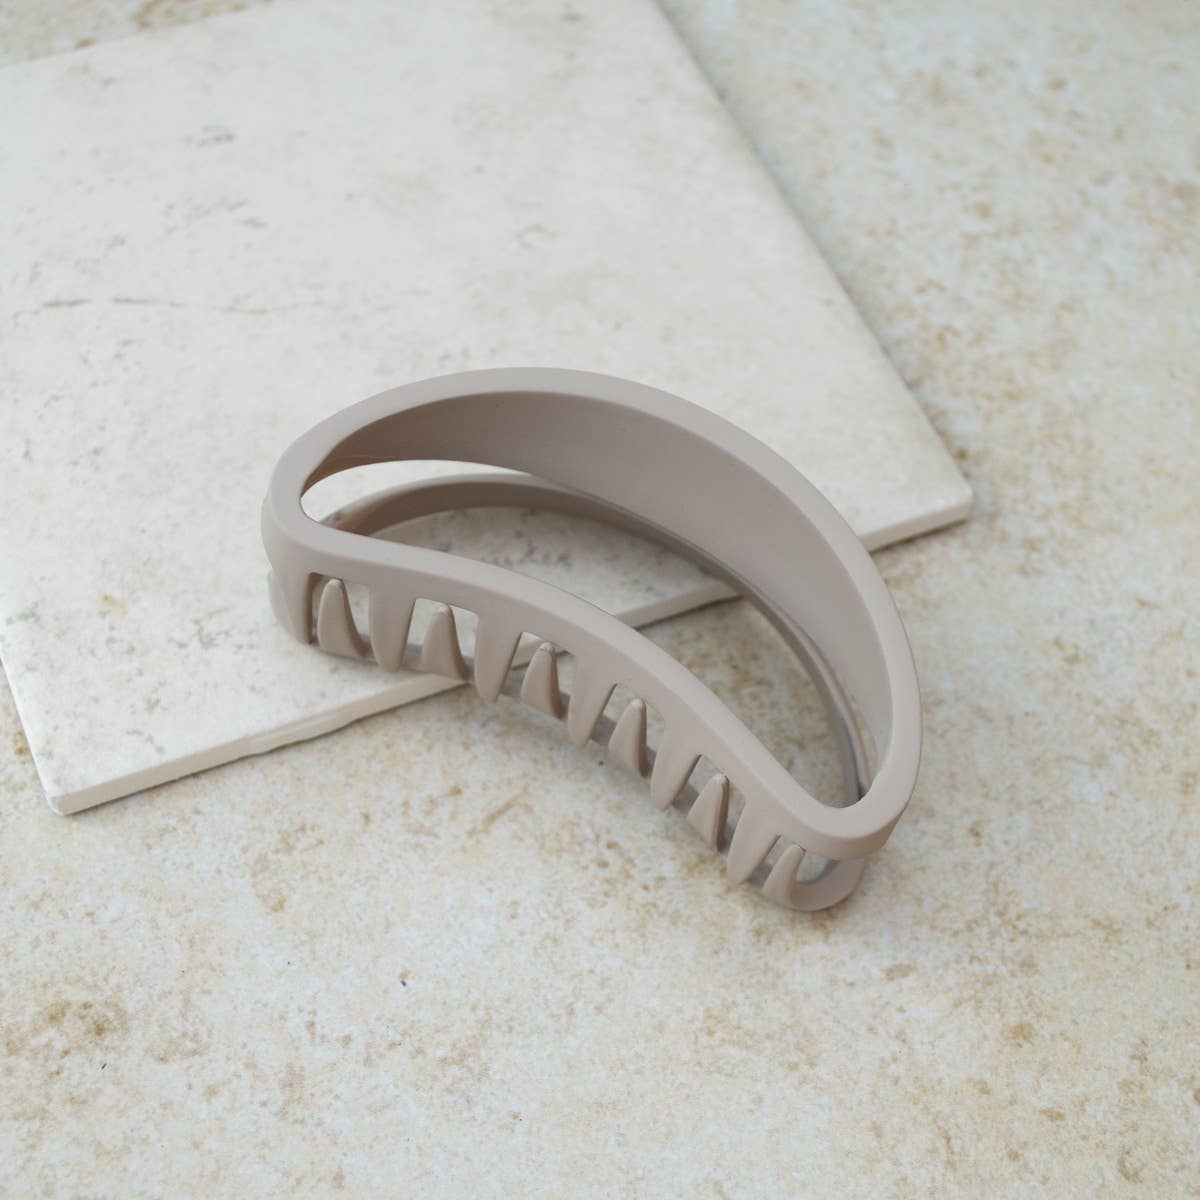 bean shaped claw clip in khaki color